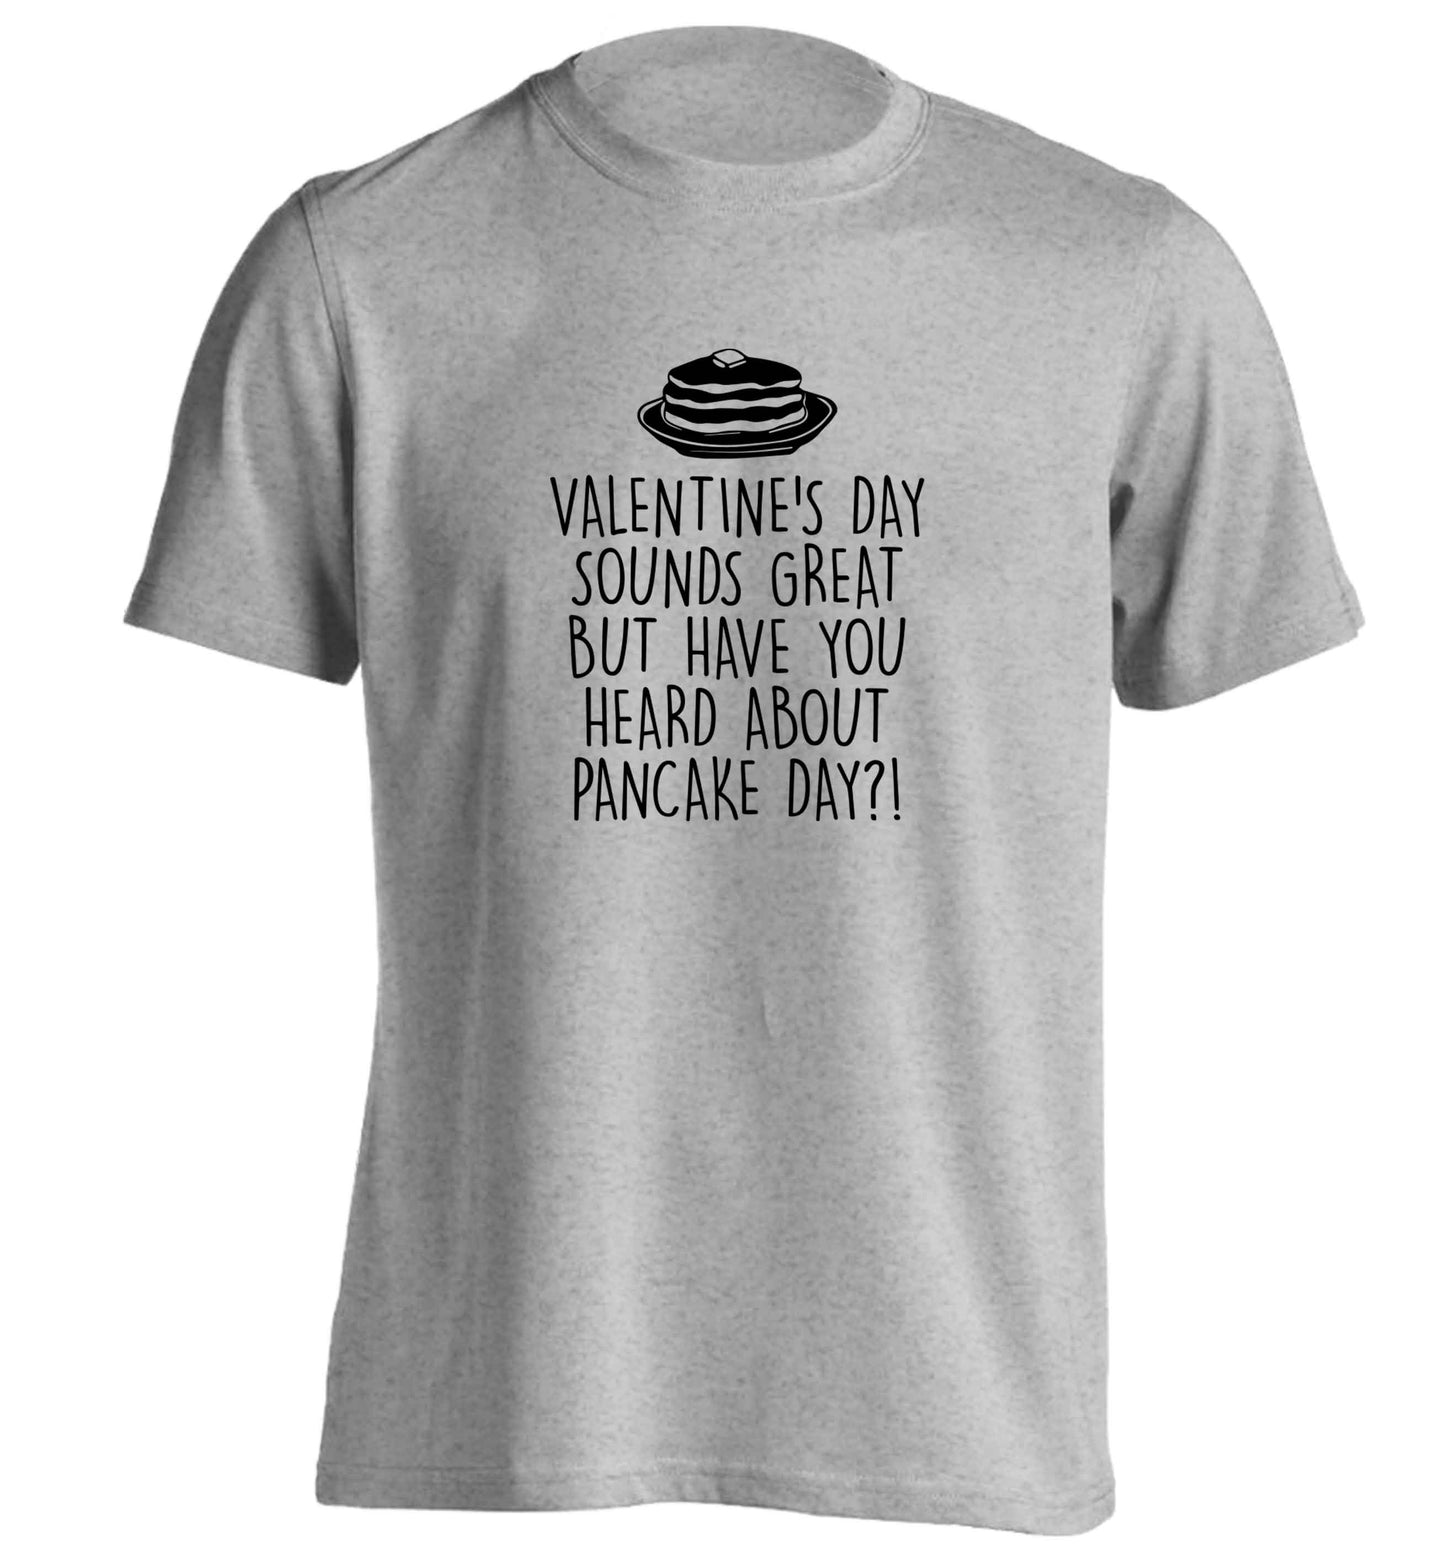 Valentine's day sounds great but have you heard about pancake day?! adults unisex grey Tshirt 2XL